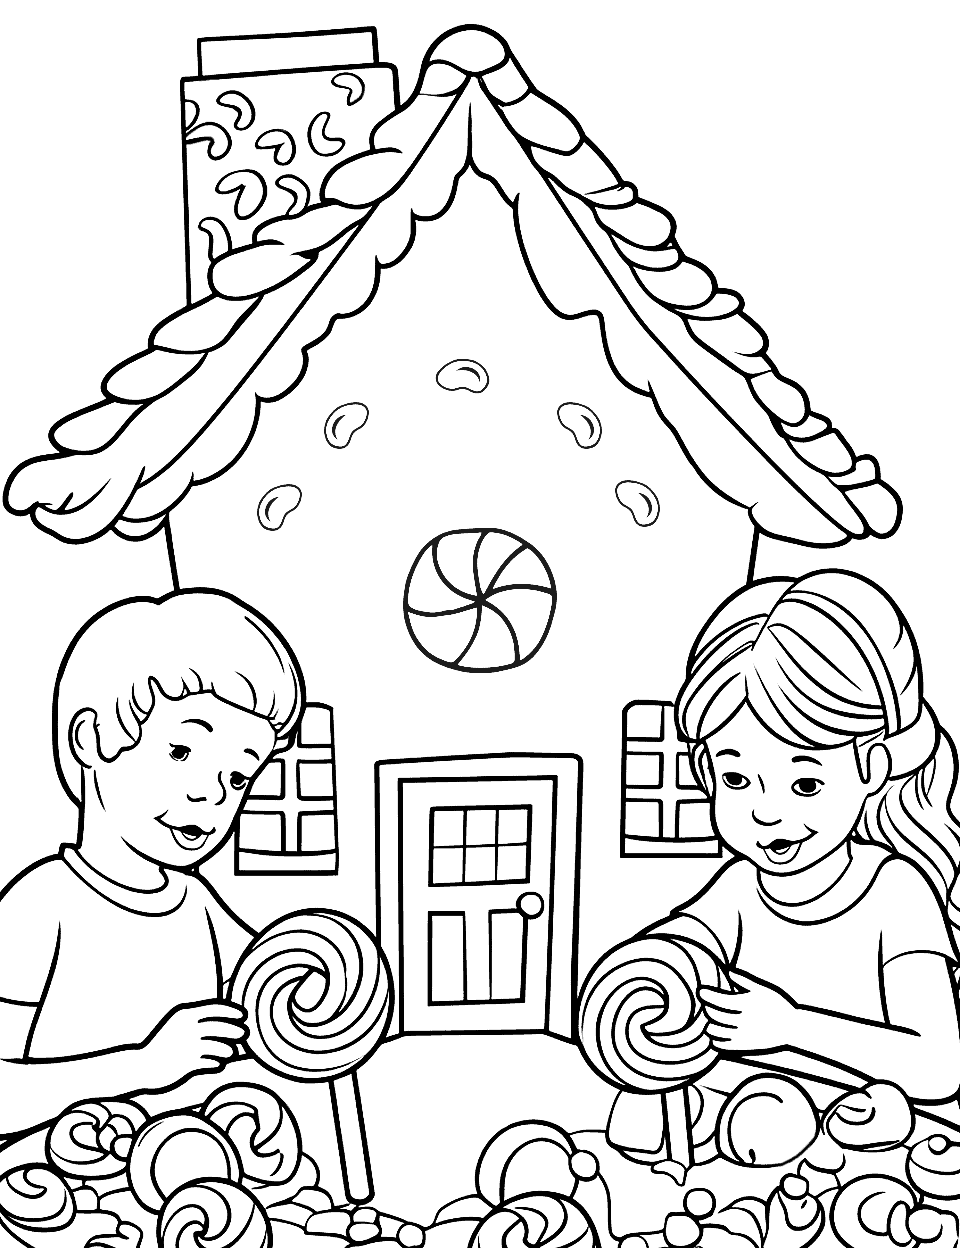 Gingerbread House Construction Candy Coloring Page - Kids decorate a large, detailed gingerbread house with various candies.